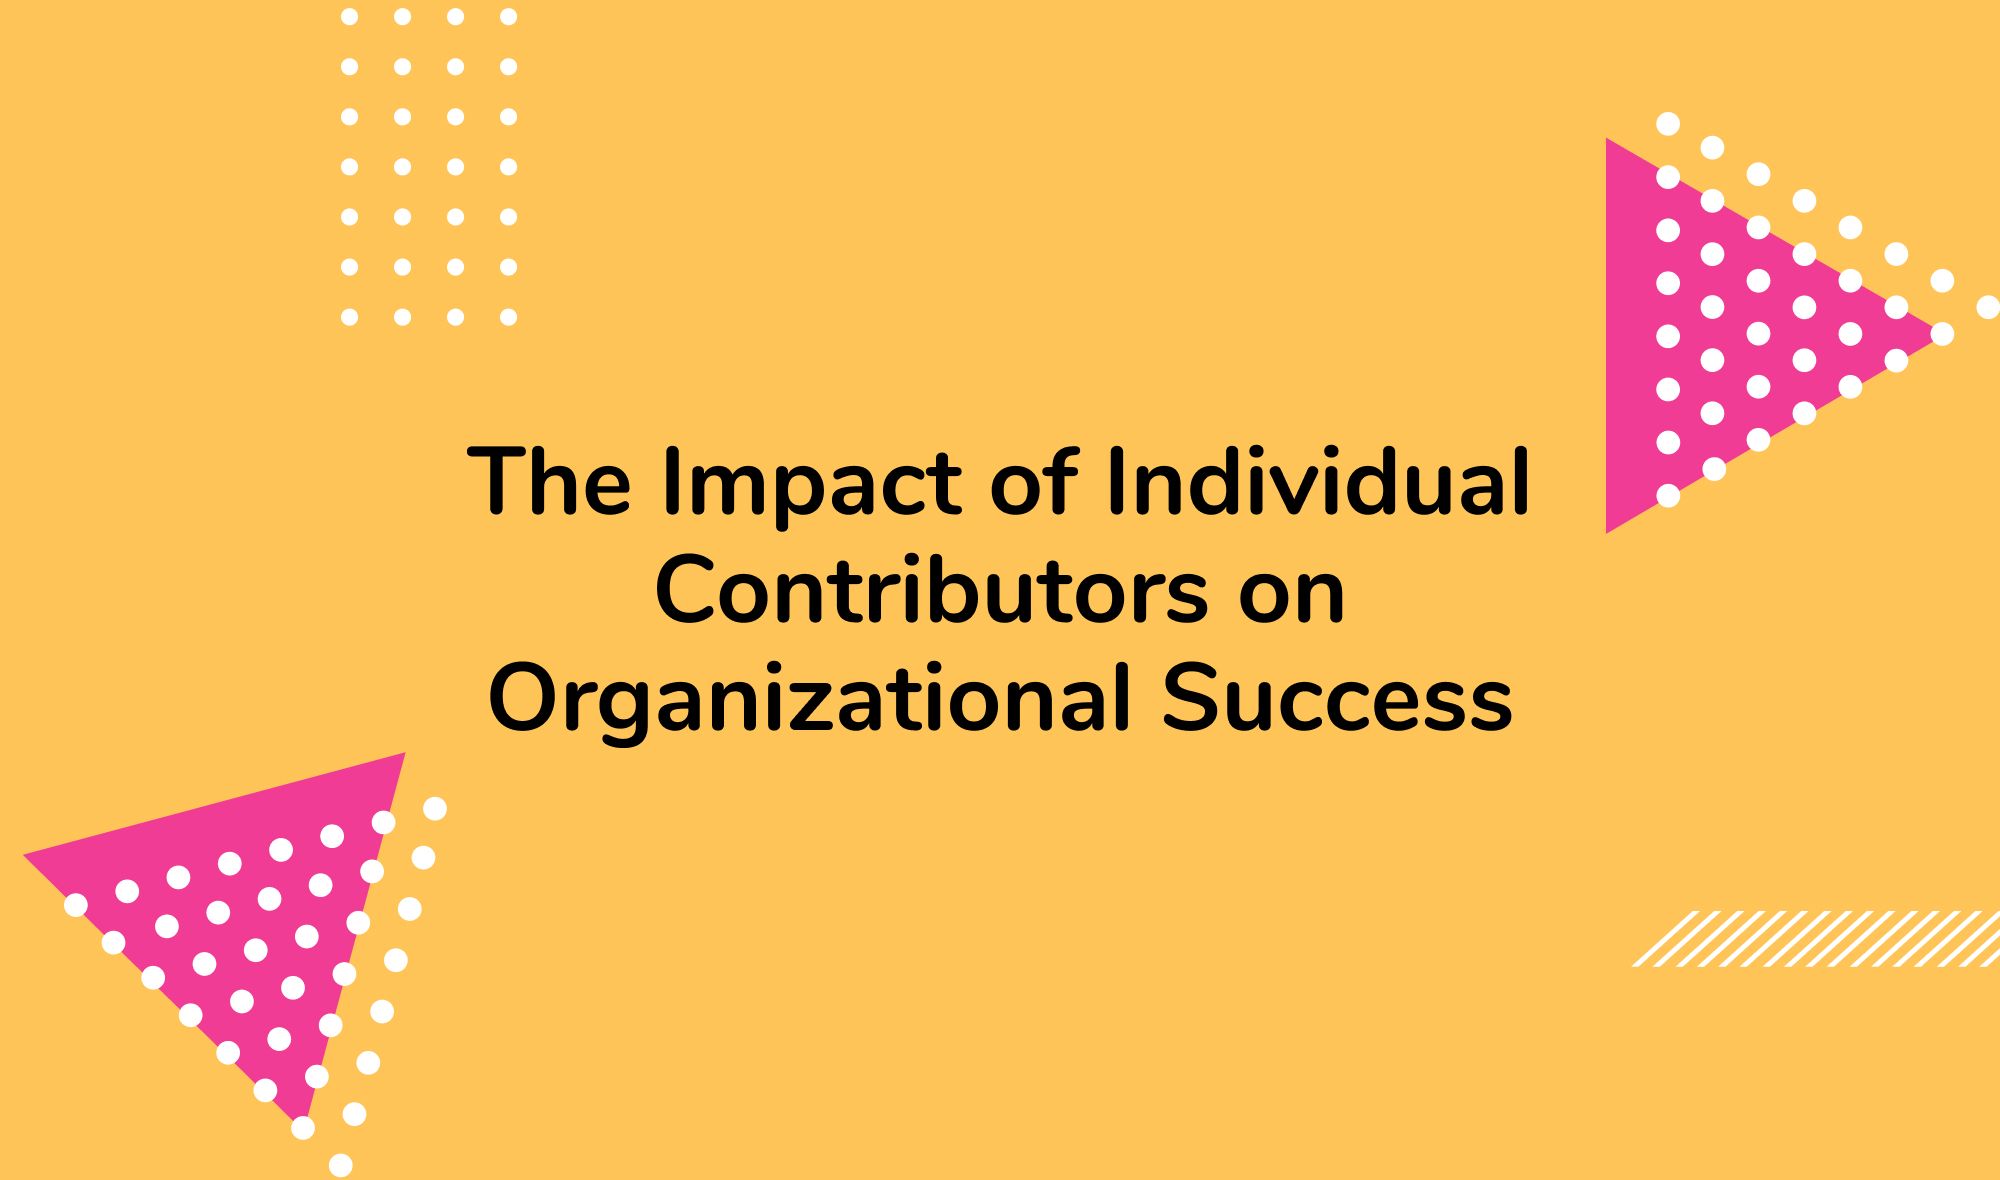 The Impact of Individual Contributors on Organizational Success